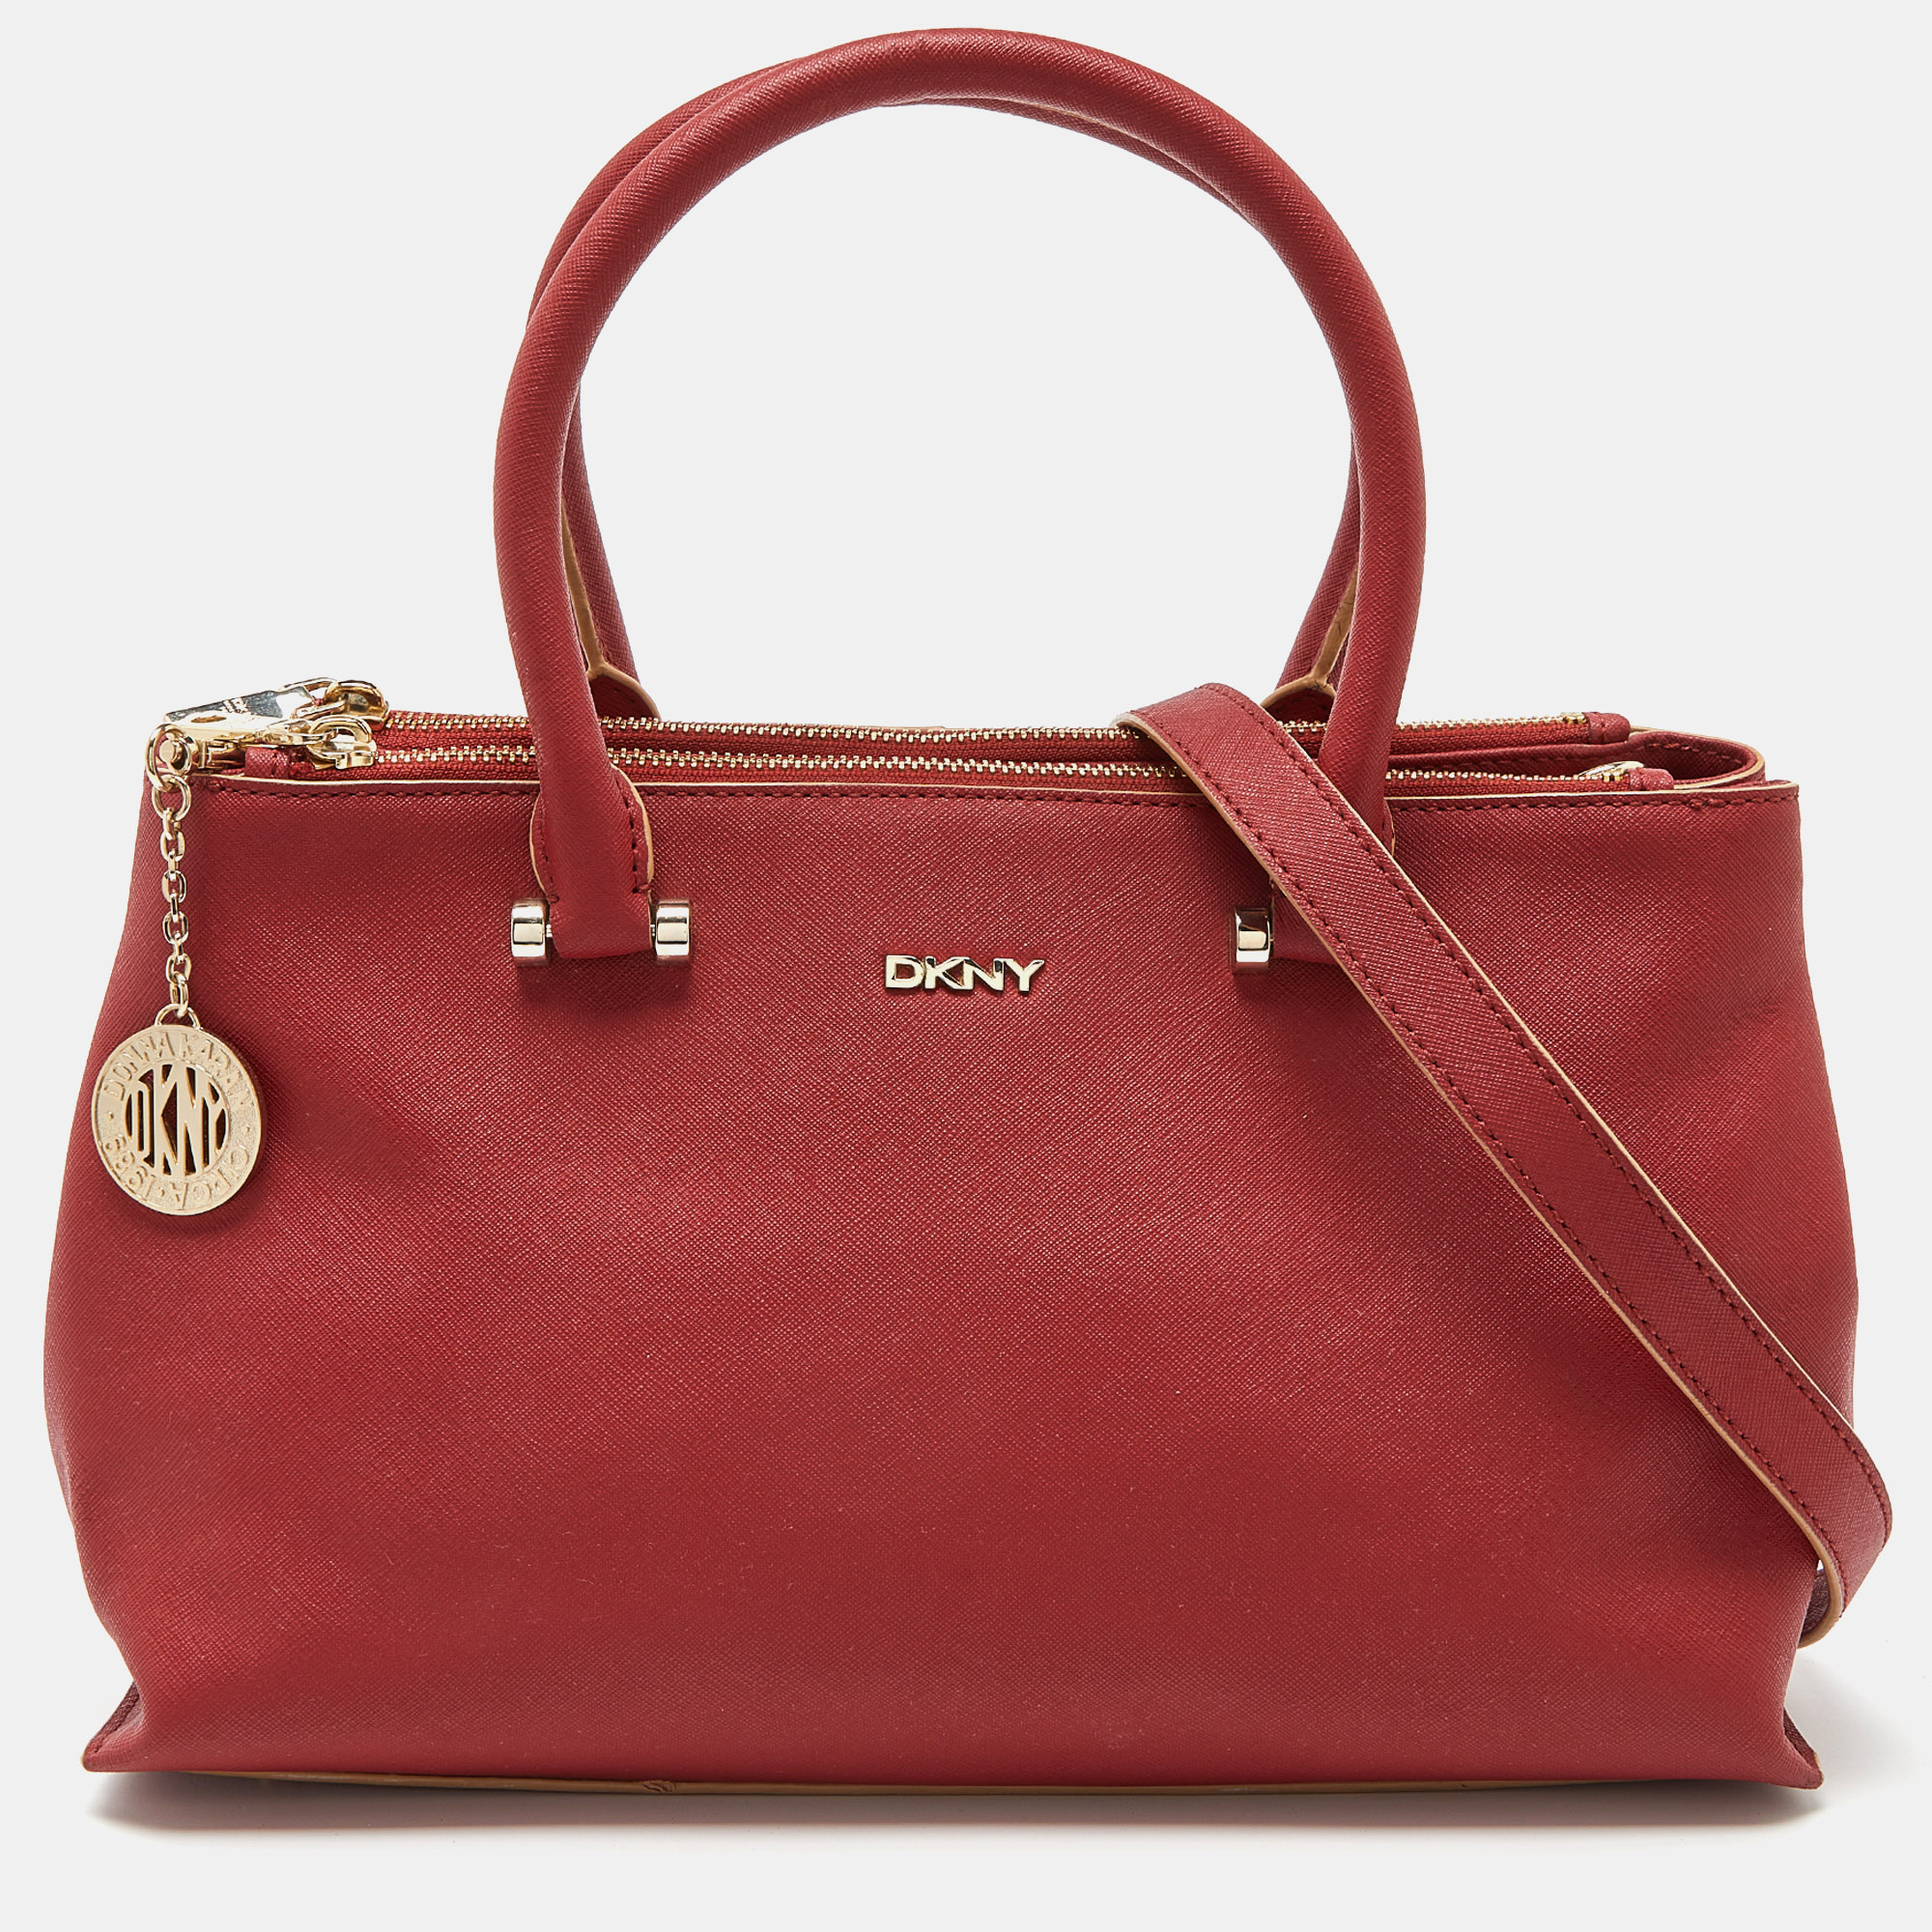 

DKNY Red Leather Bryant Park Double Zip Shopper Tote